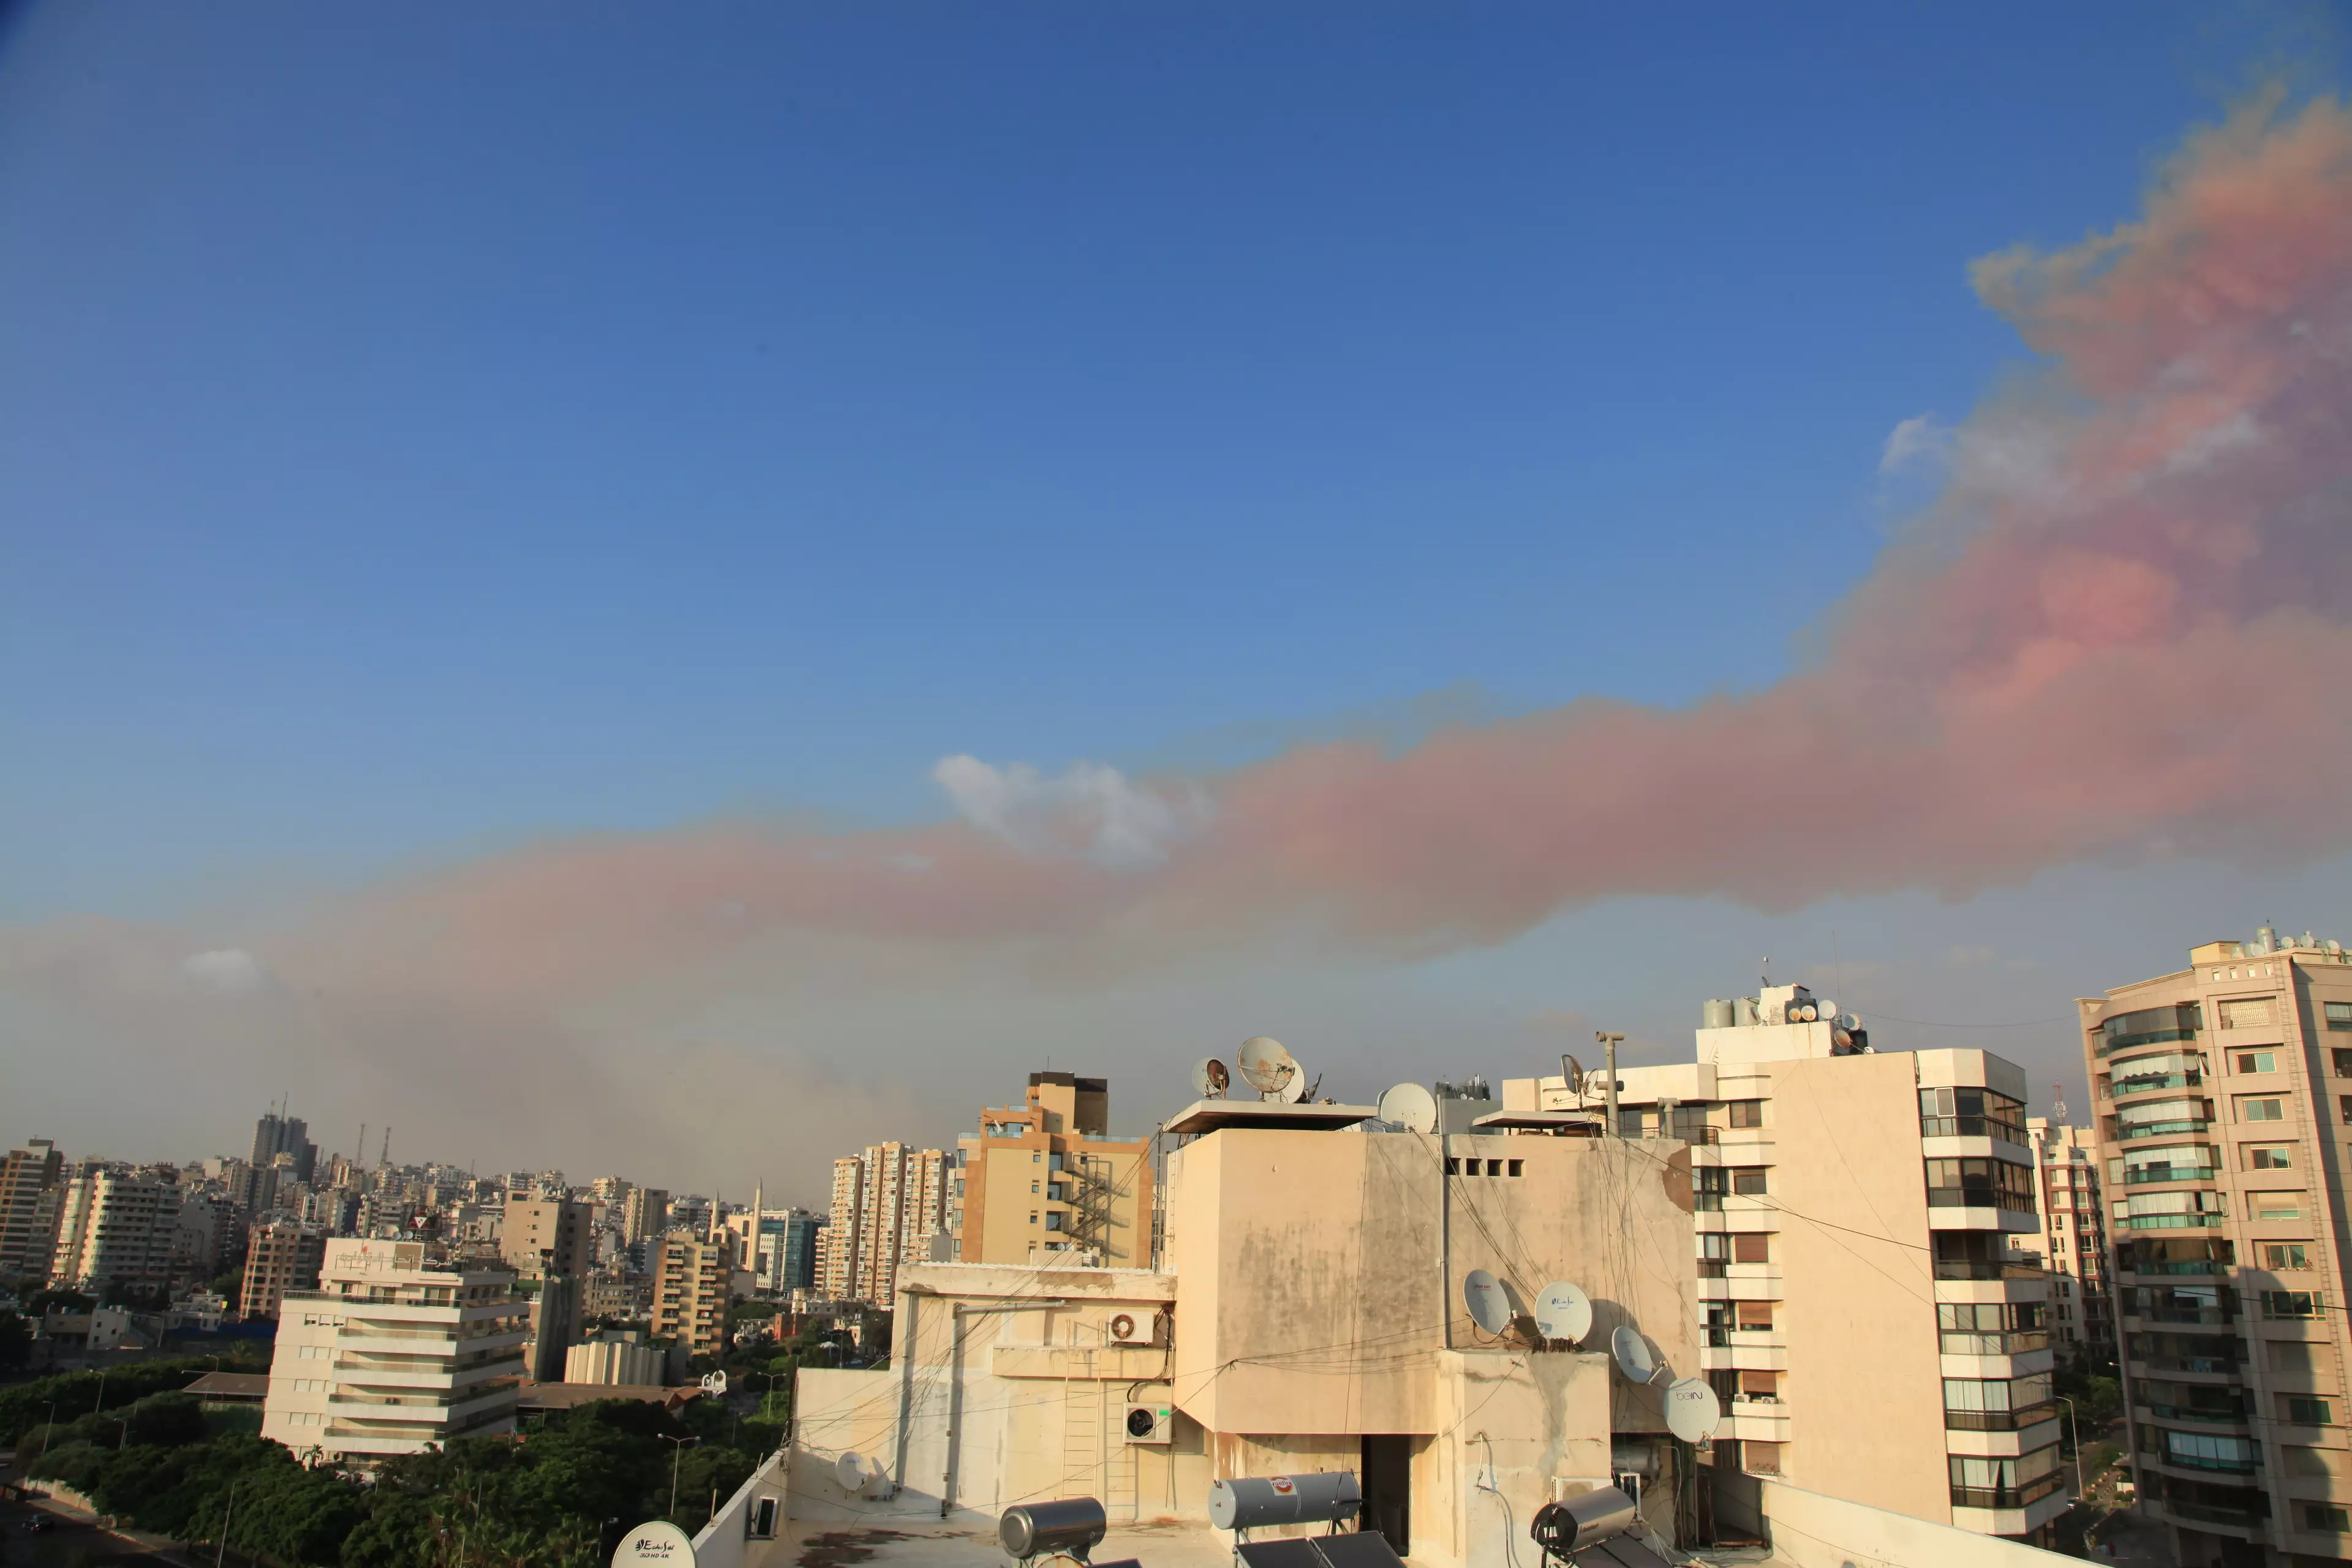 The large plume of pink smoke rises over Beirut.